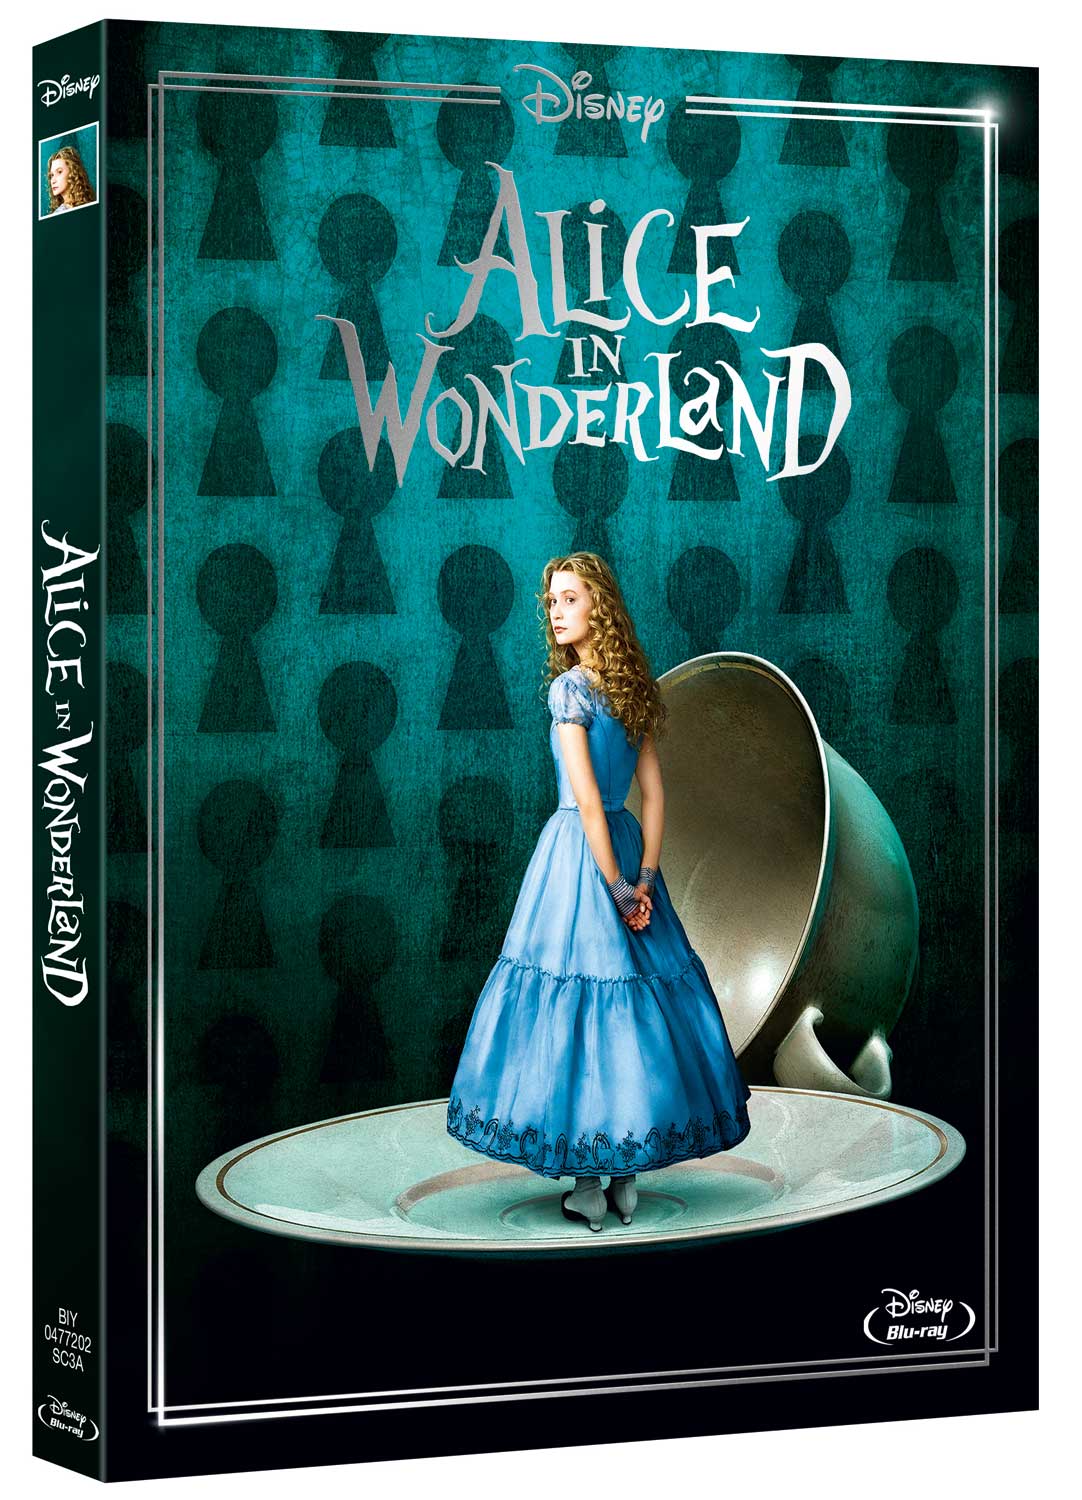 ALICE IN WONDERLAND (LIVE ACTION) (NEW EDITION)